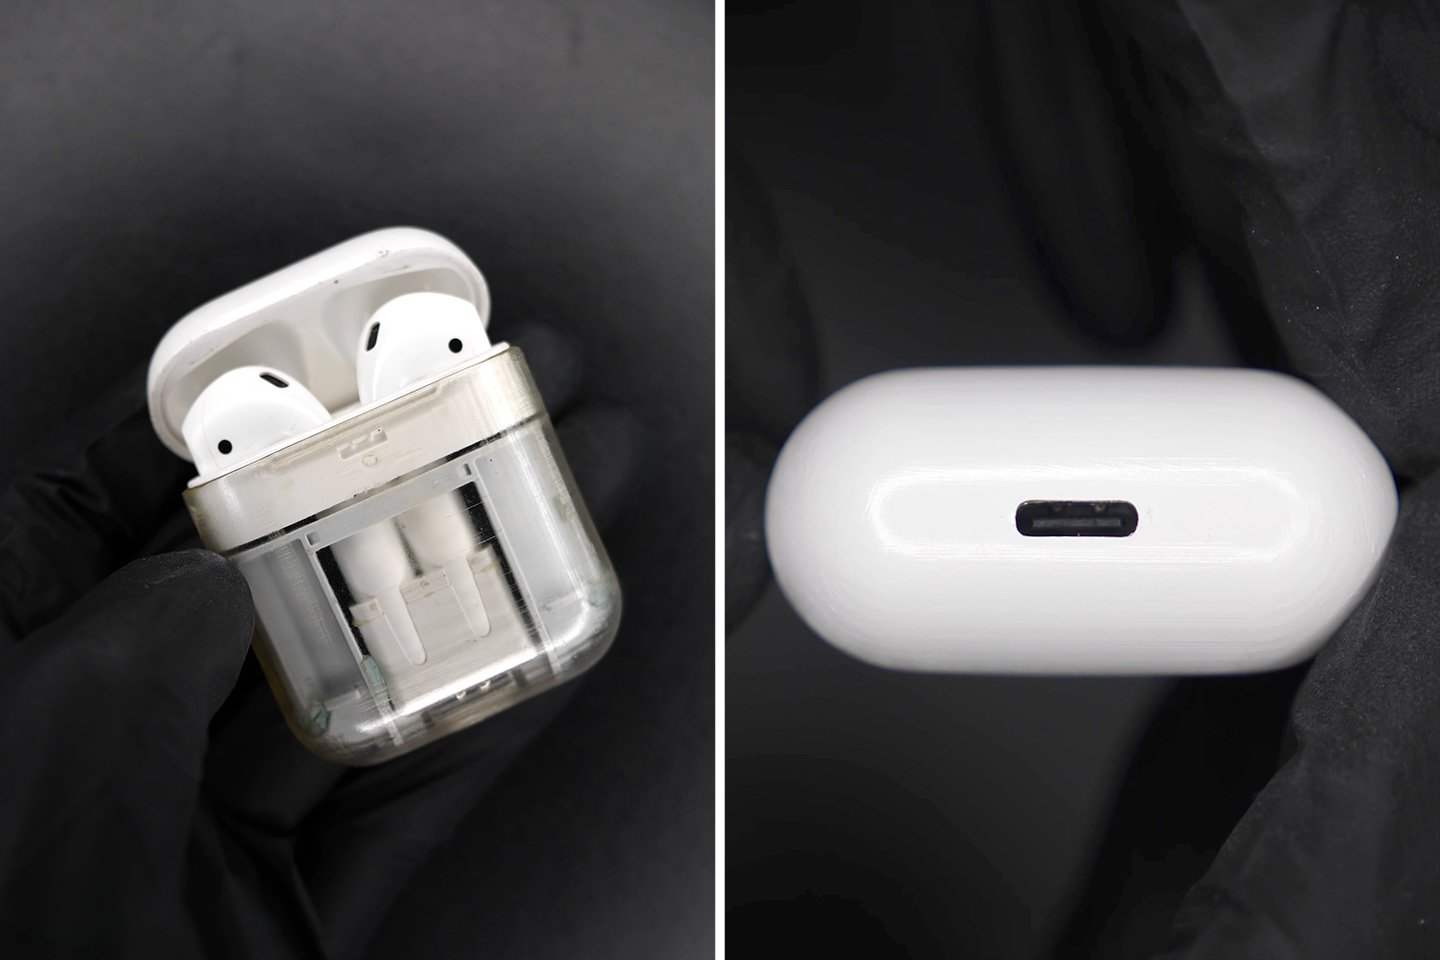 #The designer behind the USB-C iPhone has now made the world’s first AirPods with a USB-C port